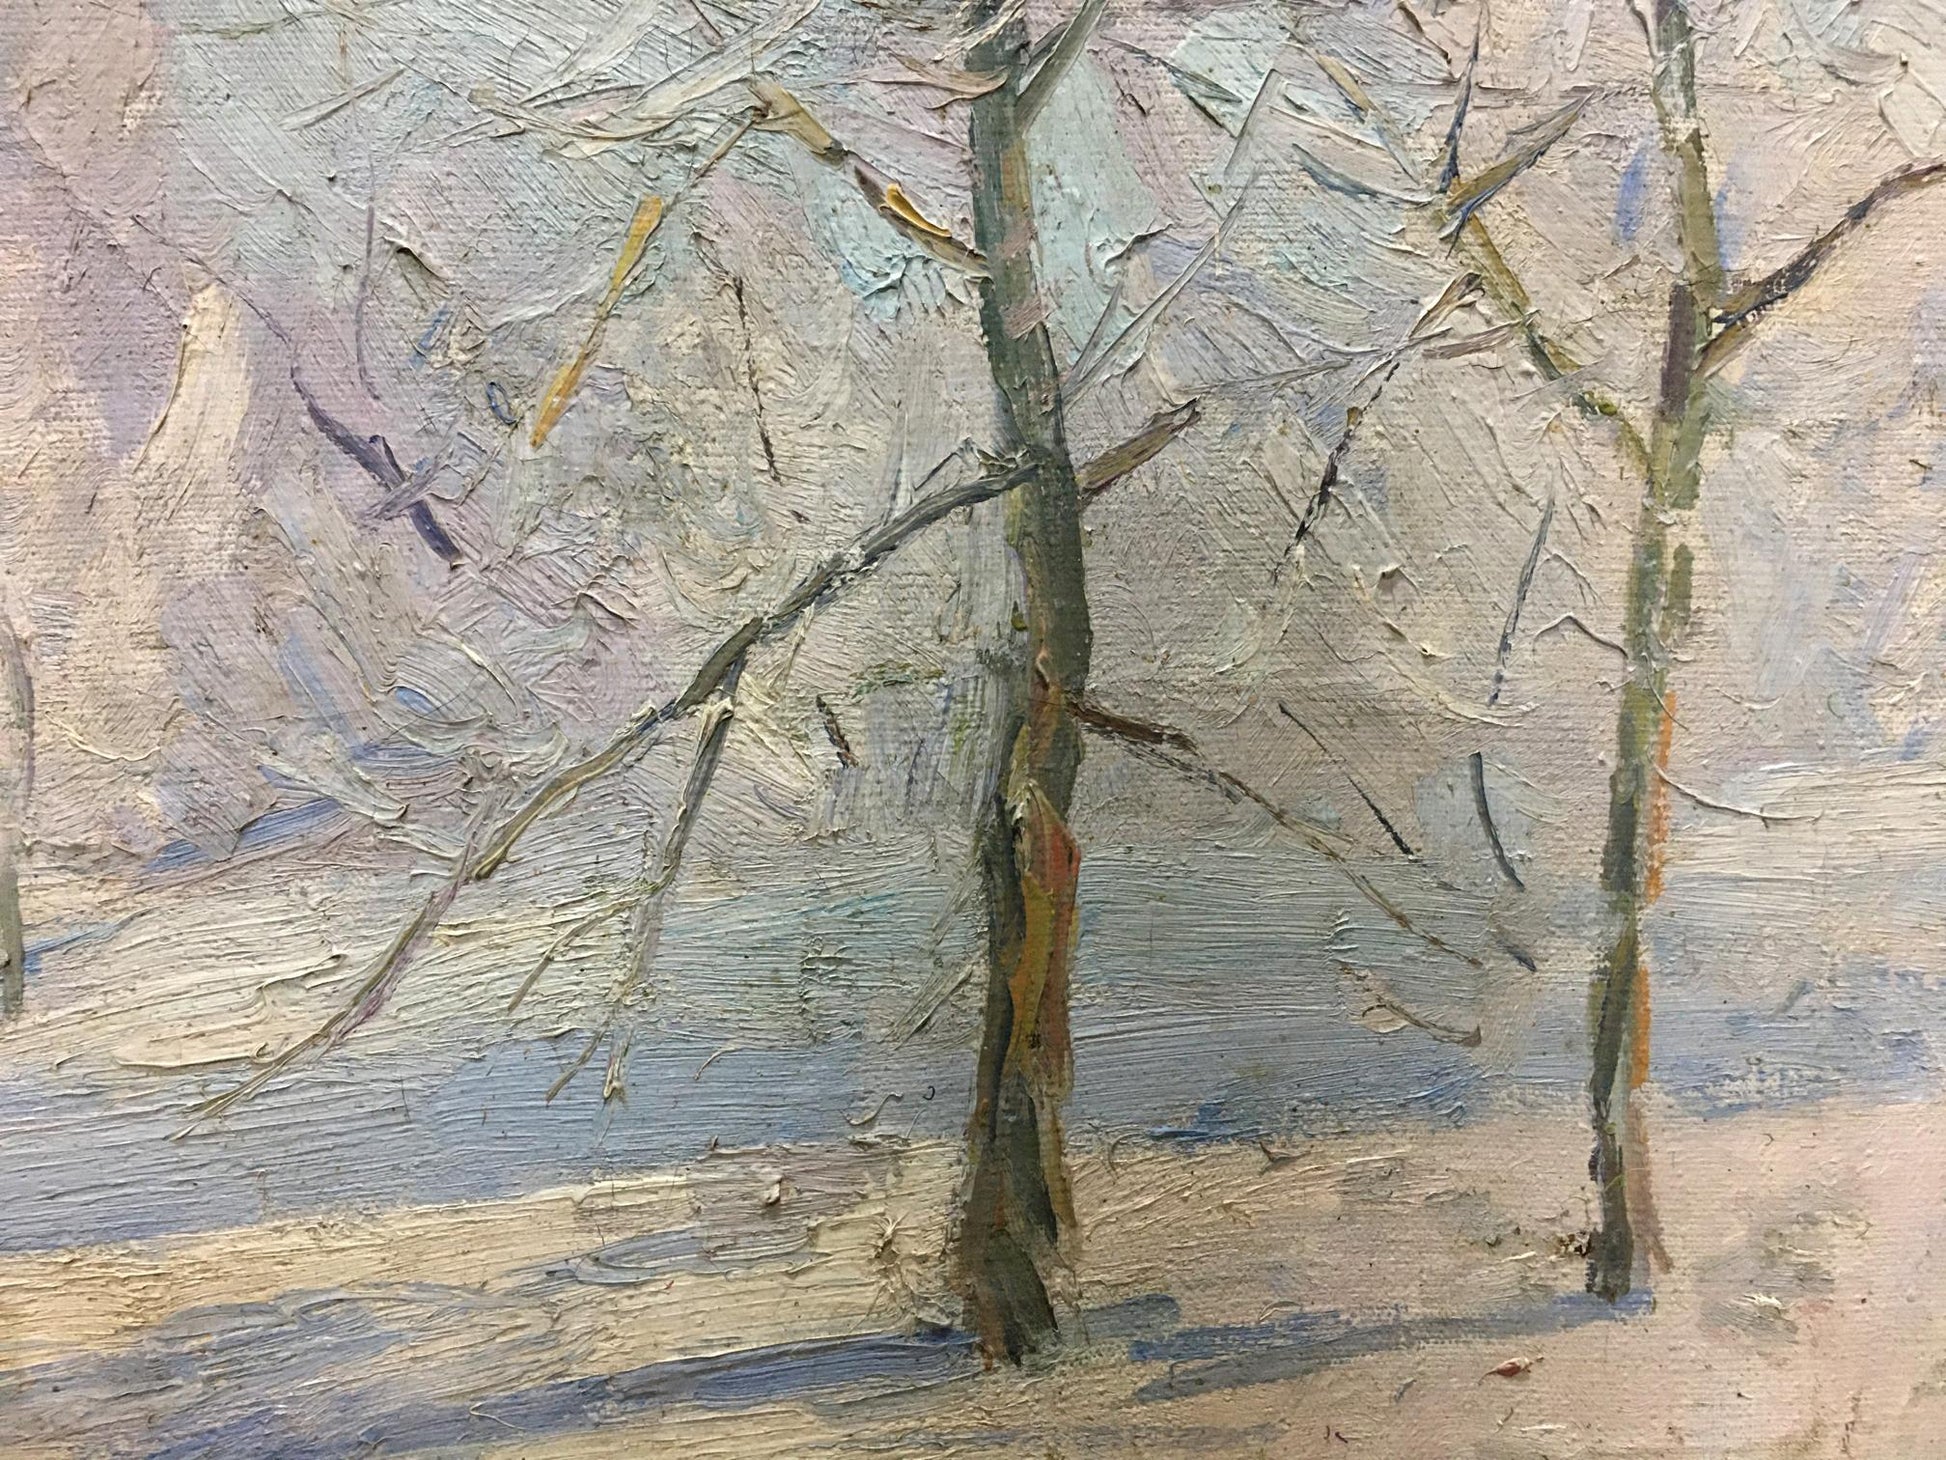 The Serenity of Snow: Matvey Kogan-Shats' Oil Painting of the Winter Forest